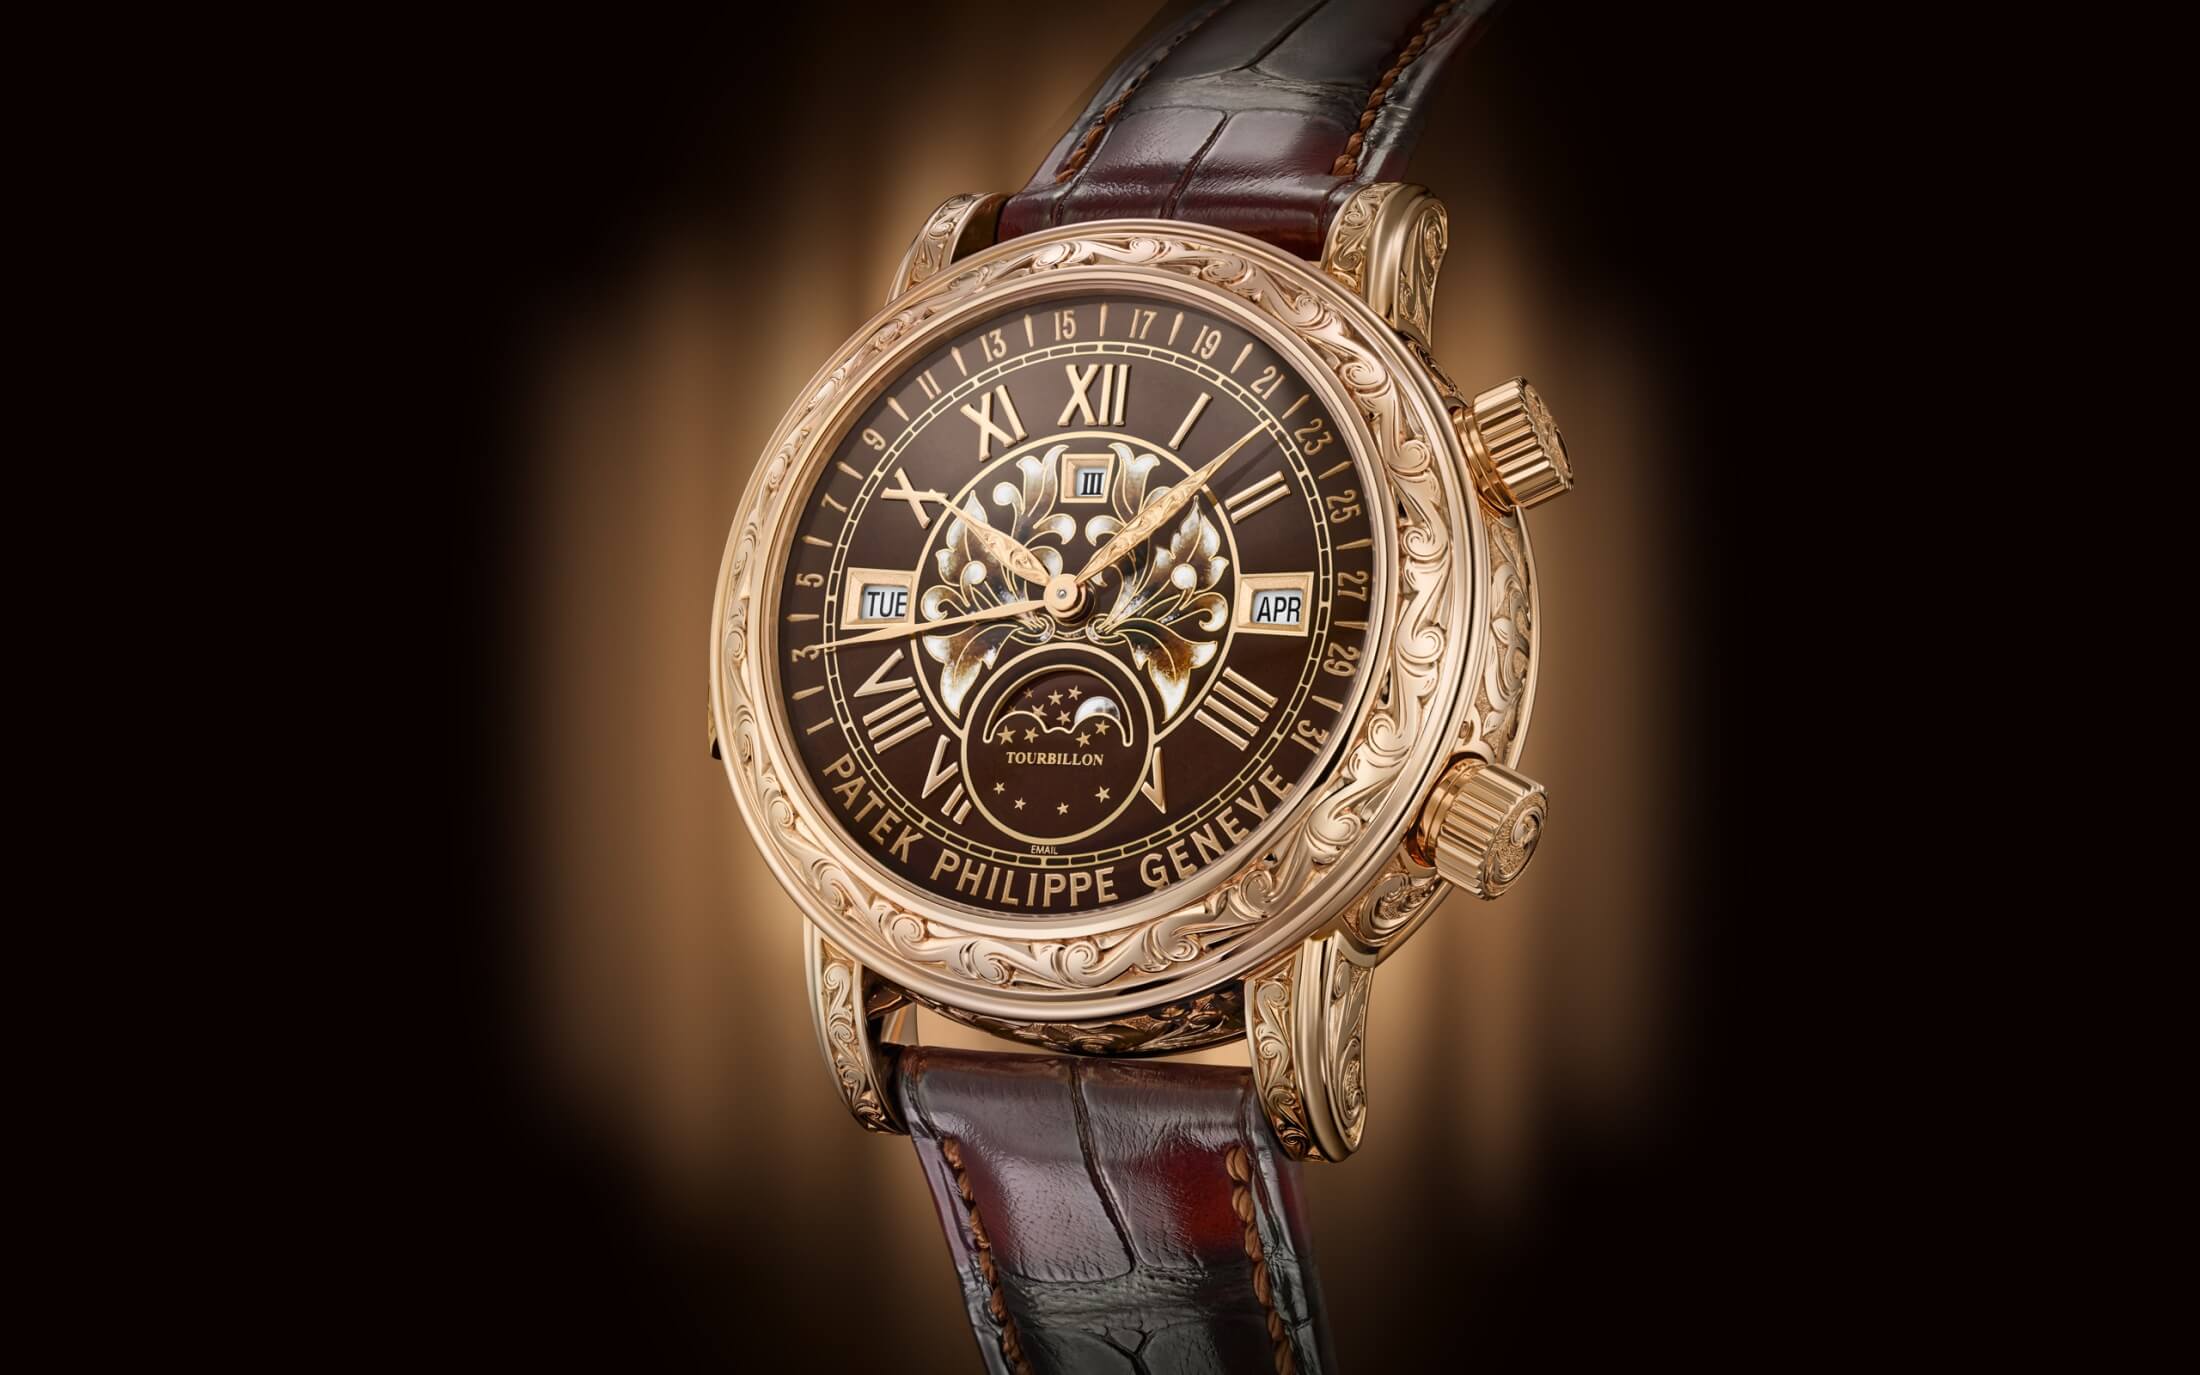 Patek Philippe Grand Complications 6002r 001 At Cortina Watch Featured Image 1